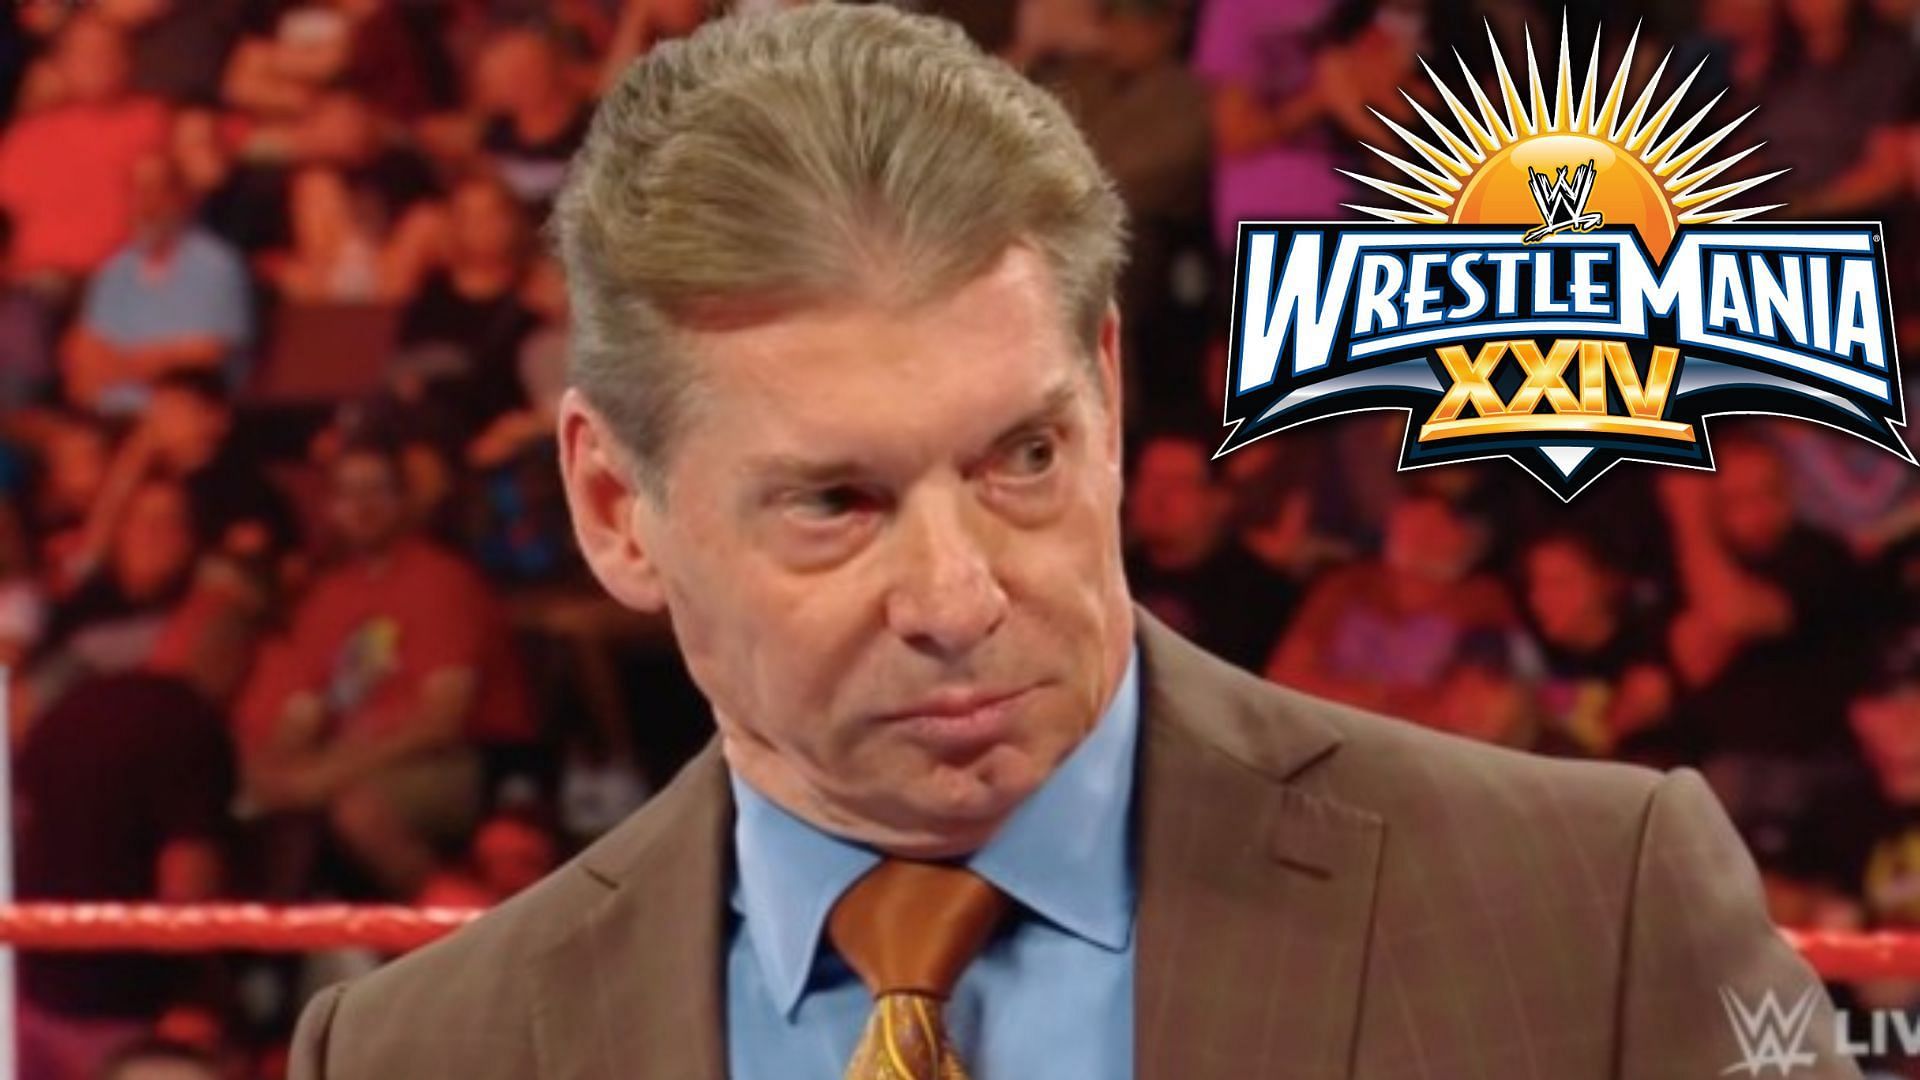 Vince McMahon had high hopes for this star before his personal demons took hold.